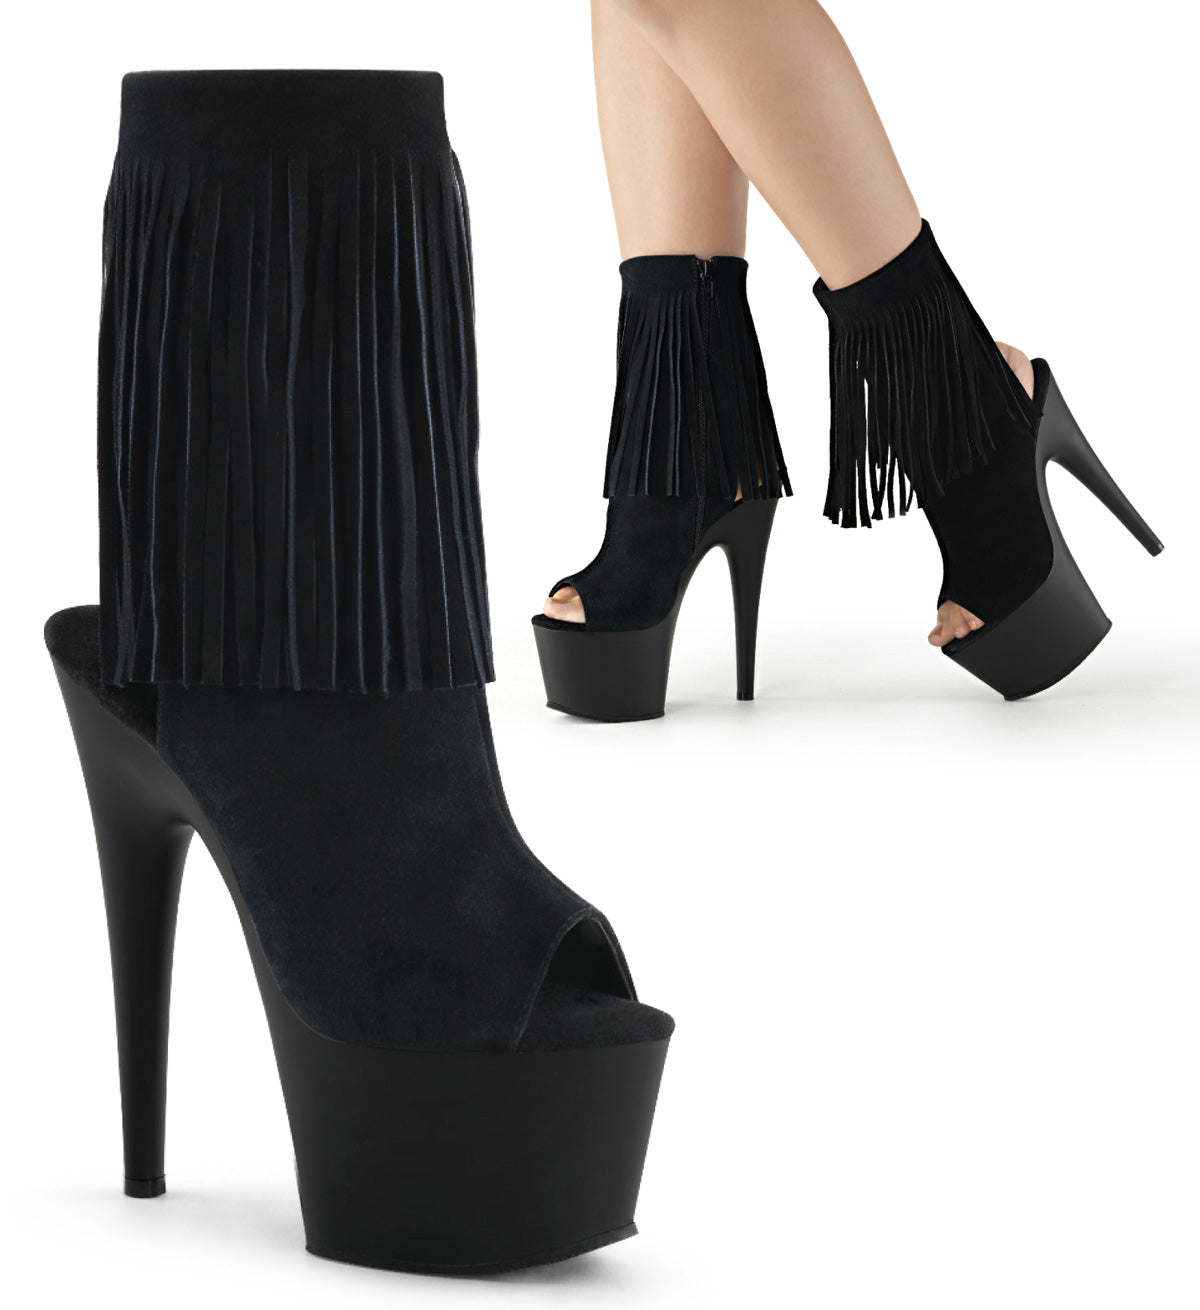 ADORE-1019 7 Inch Heel Black Suede Exotic Dancing Ankle Boot